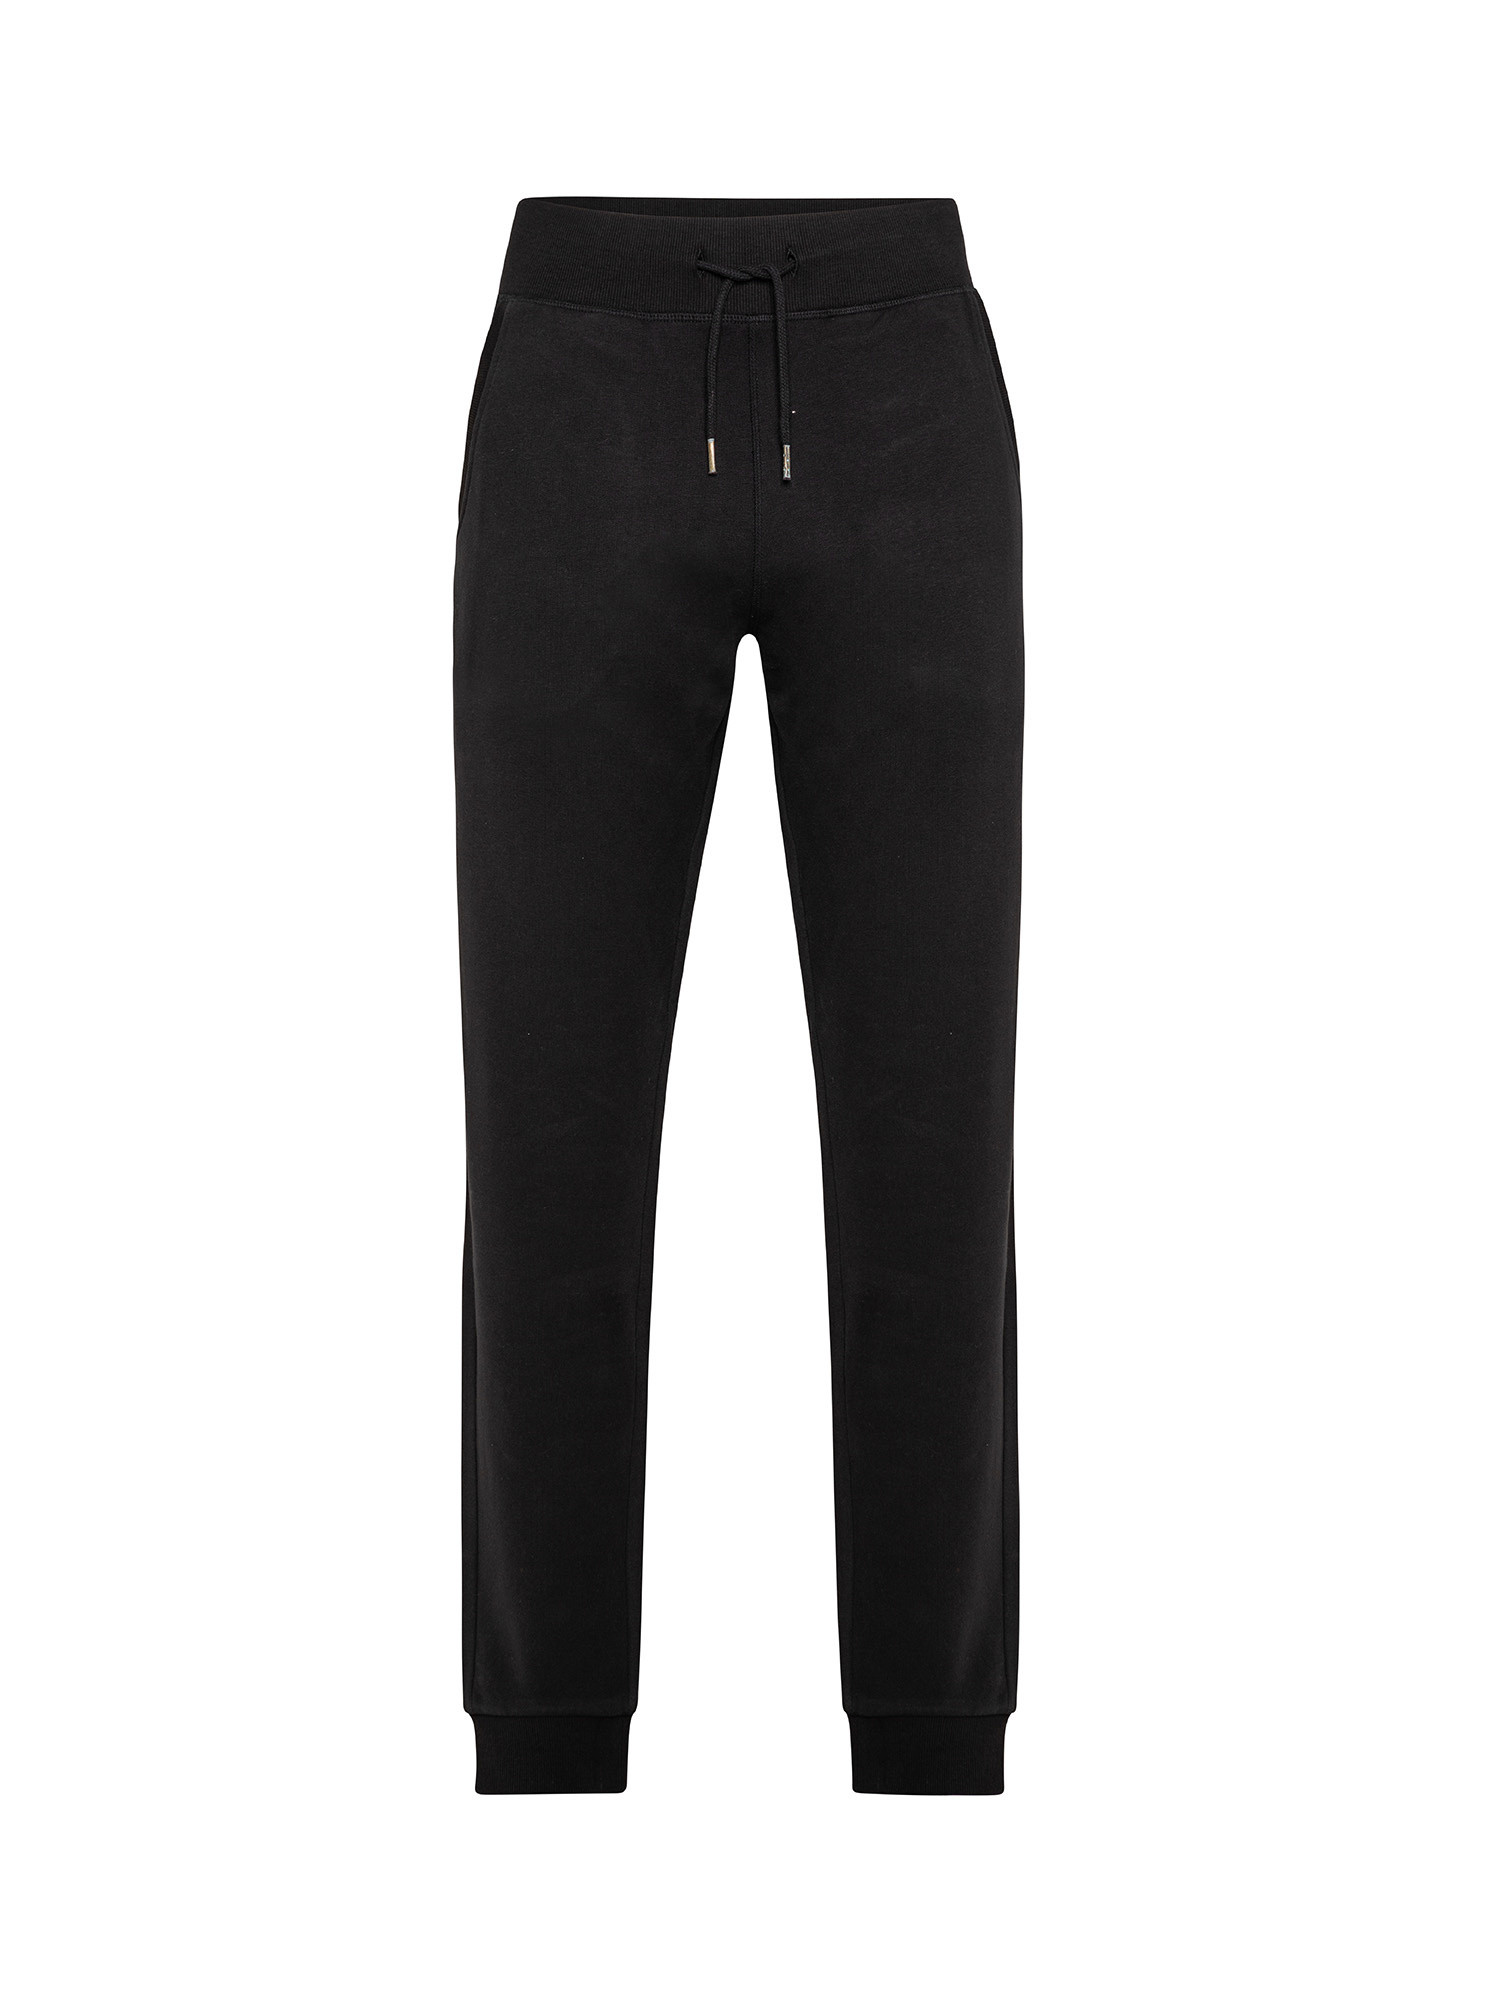 JCT - Soft touch five-pocket trousers, Black, large image number 0